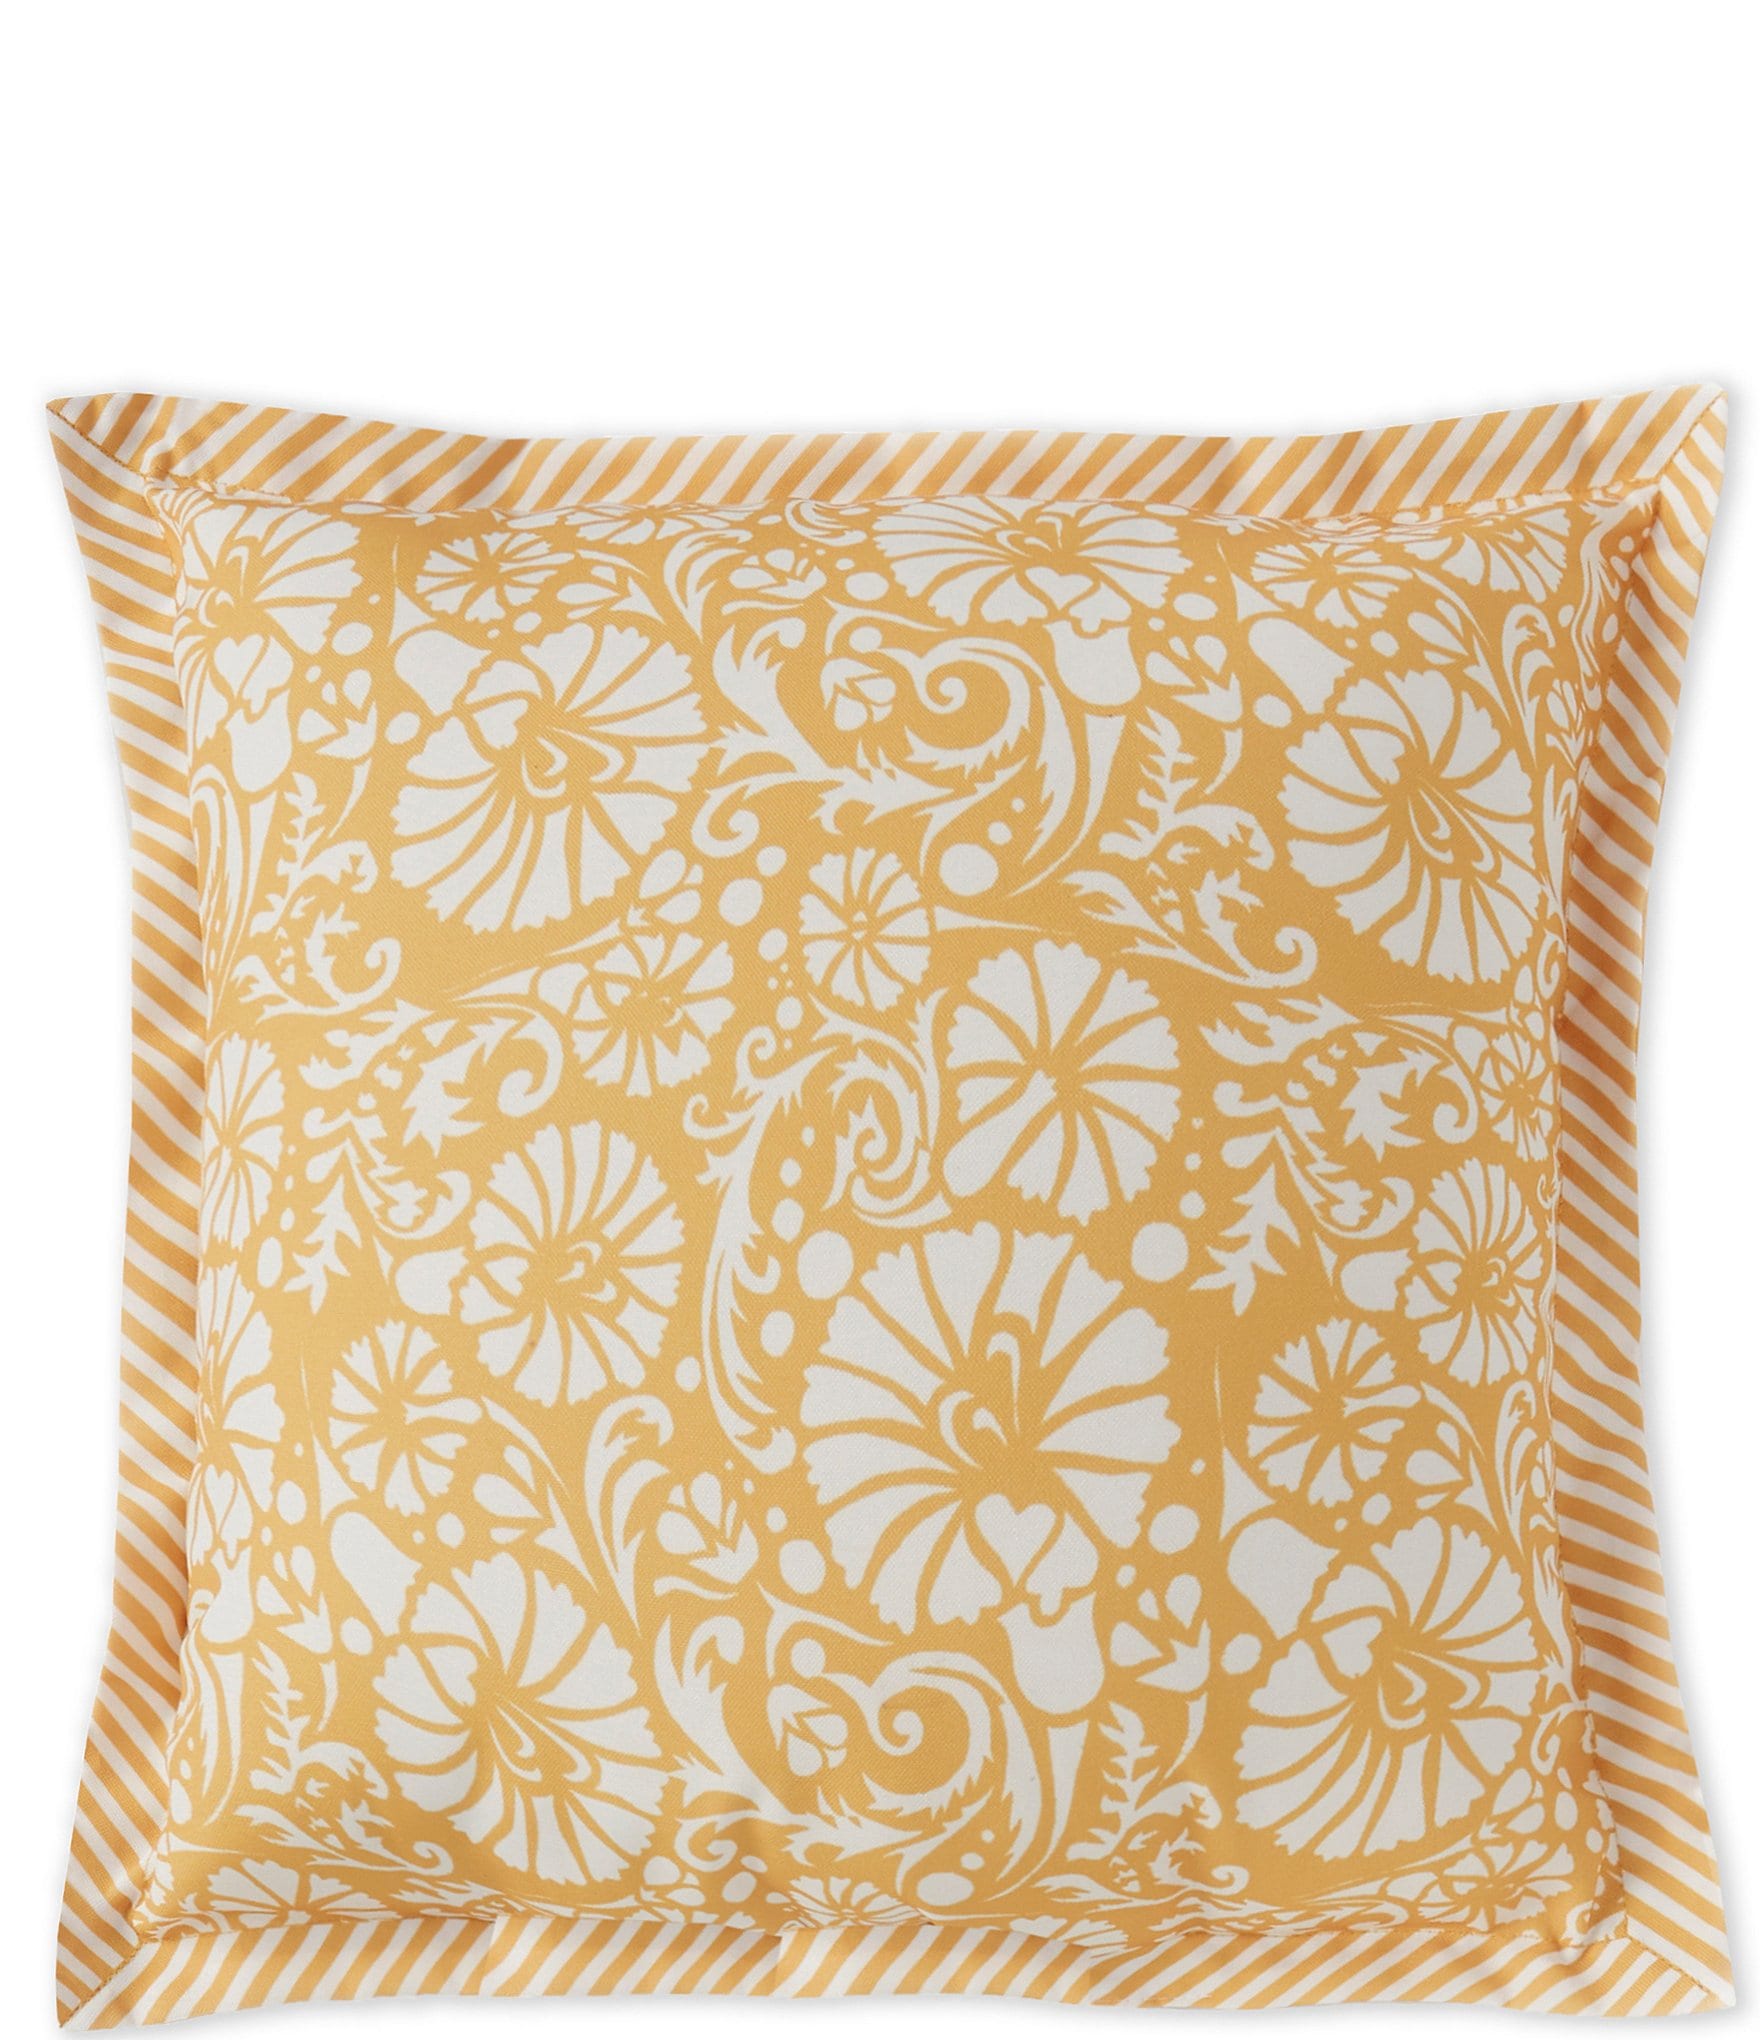 Southern Textiles Throw Pillow Inserts, New Fabric, 100% Cotton Sateen, 18x18in, 20x20in, 22x22in, 24X24In, 26x26in, 12x20in lumbar-2PKs (26x26 inch